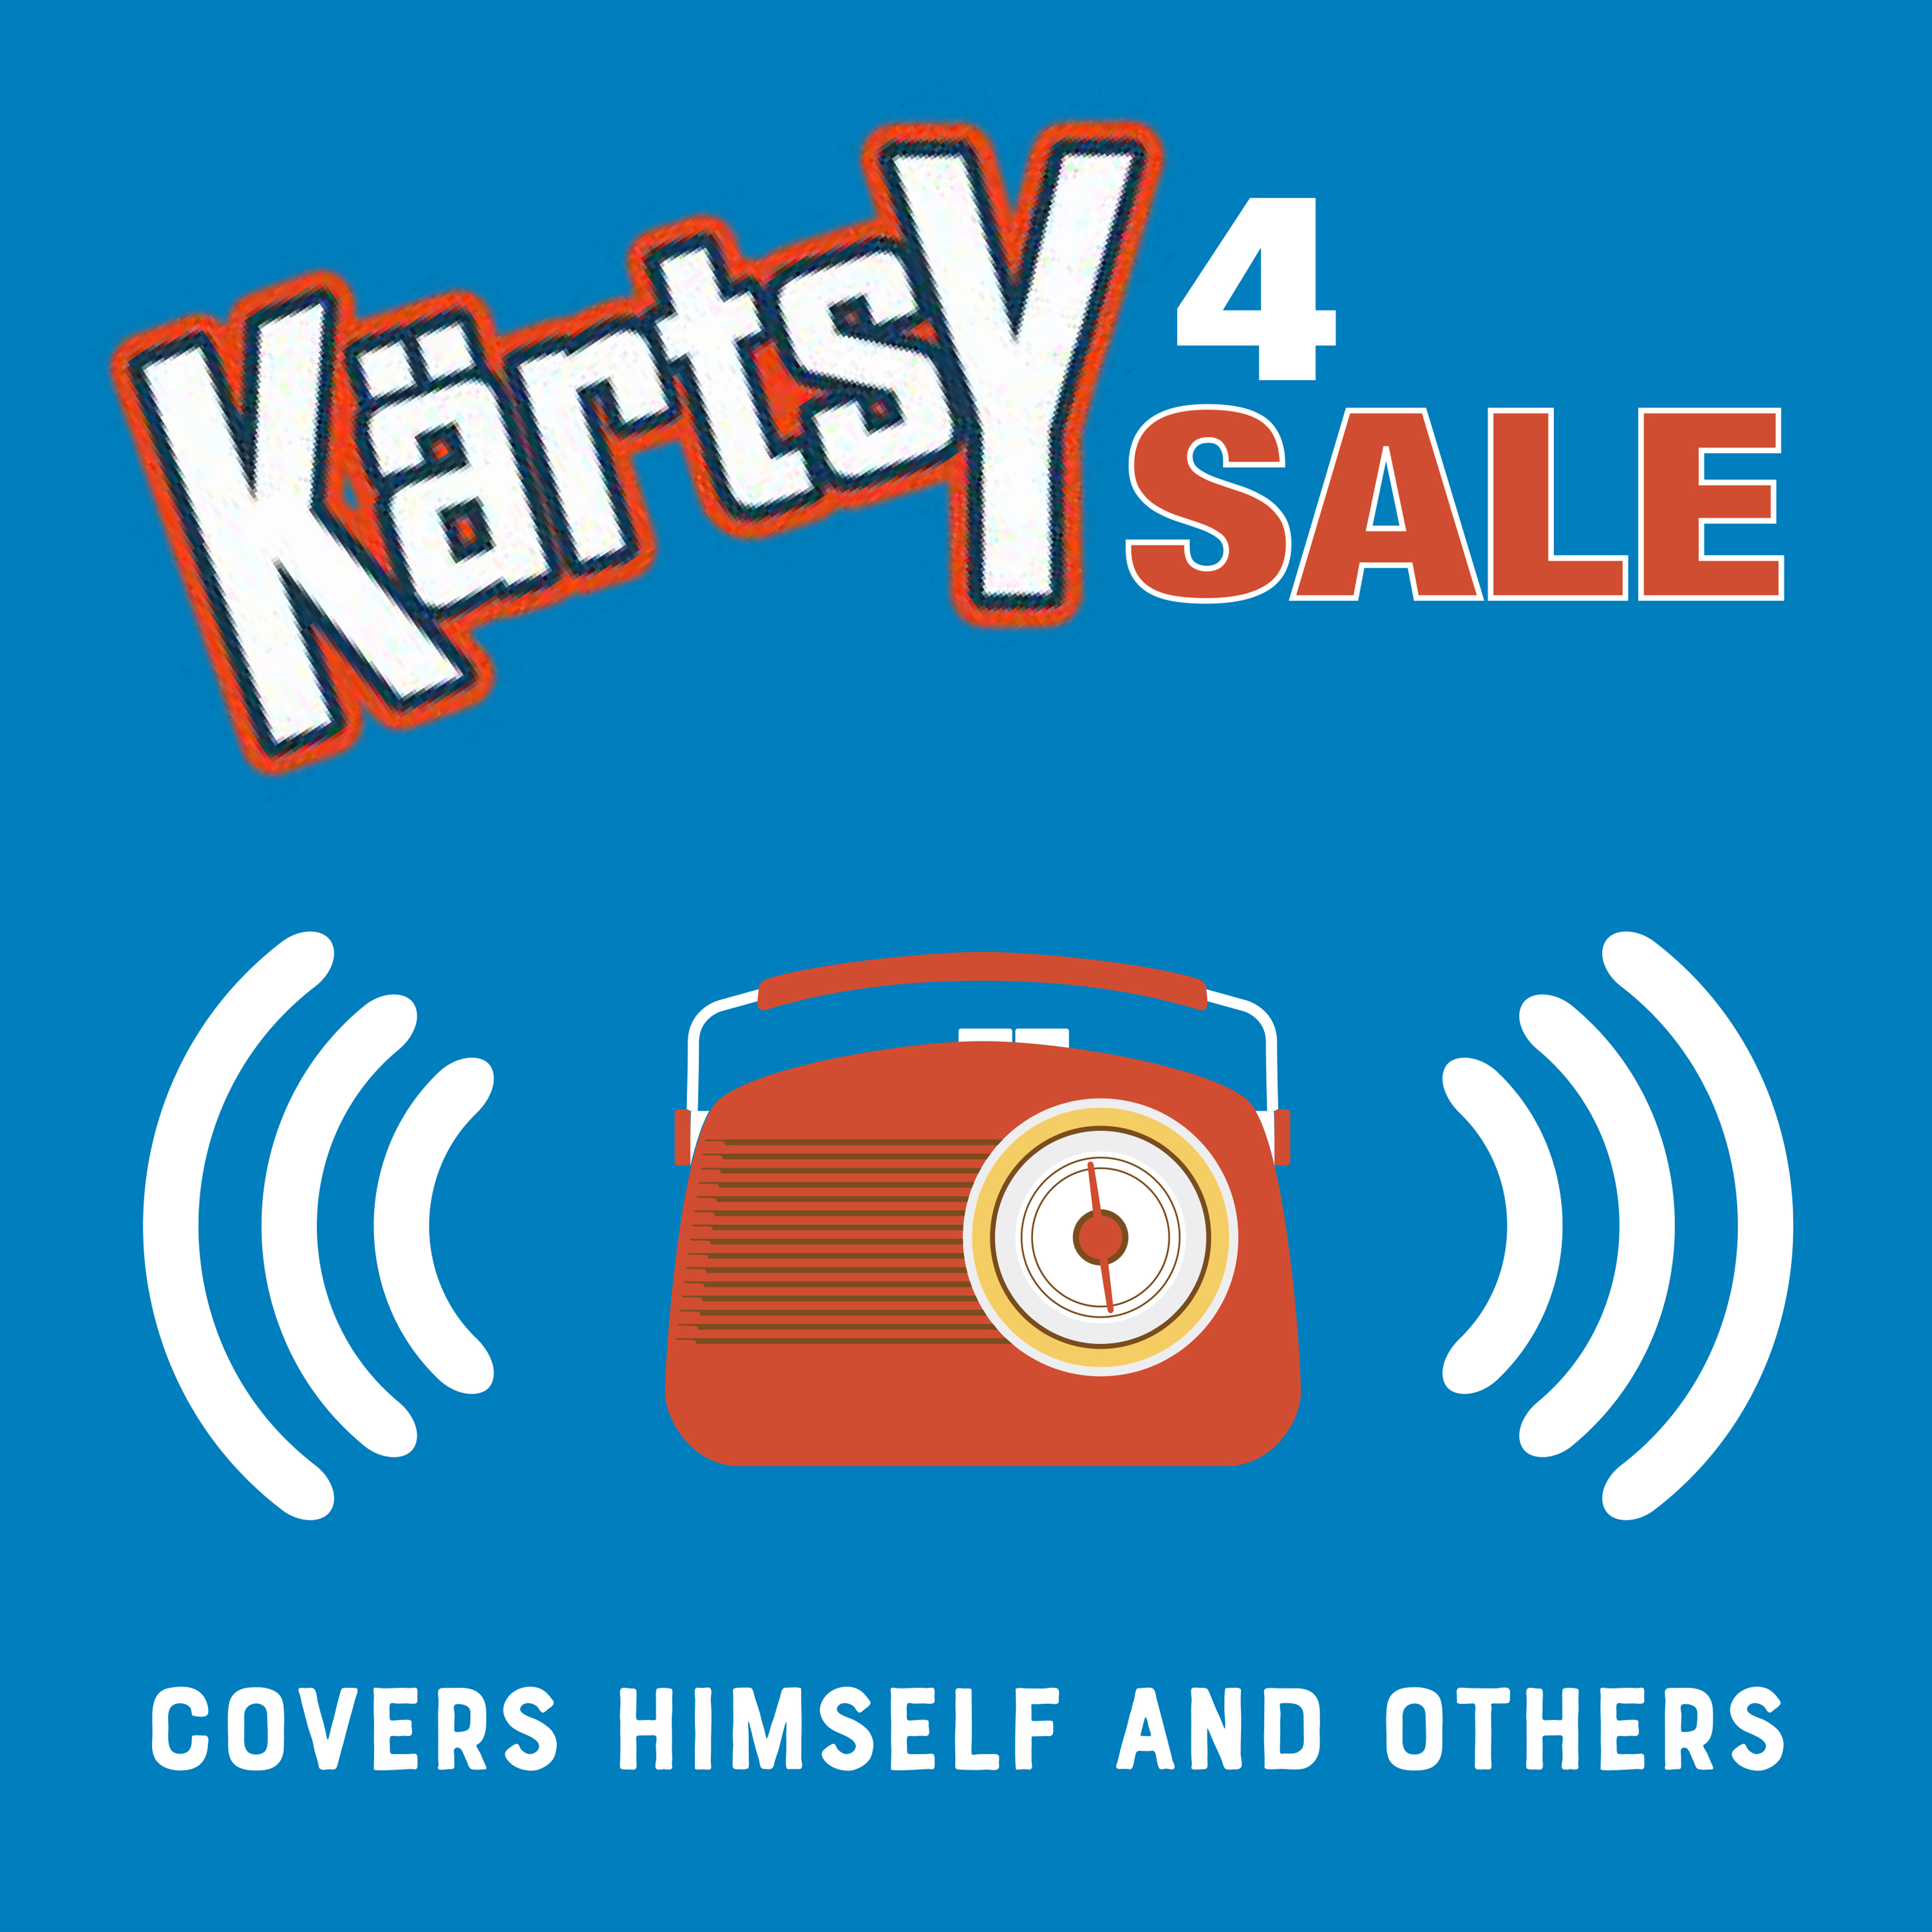 K rtsy 4 Sale - Covers Himself And Others